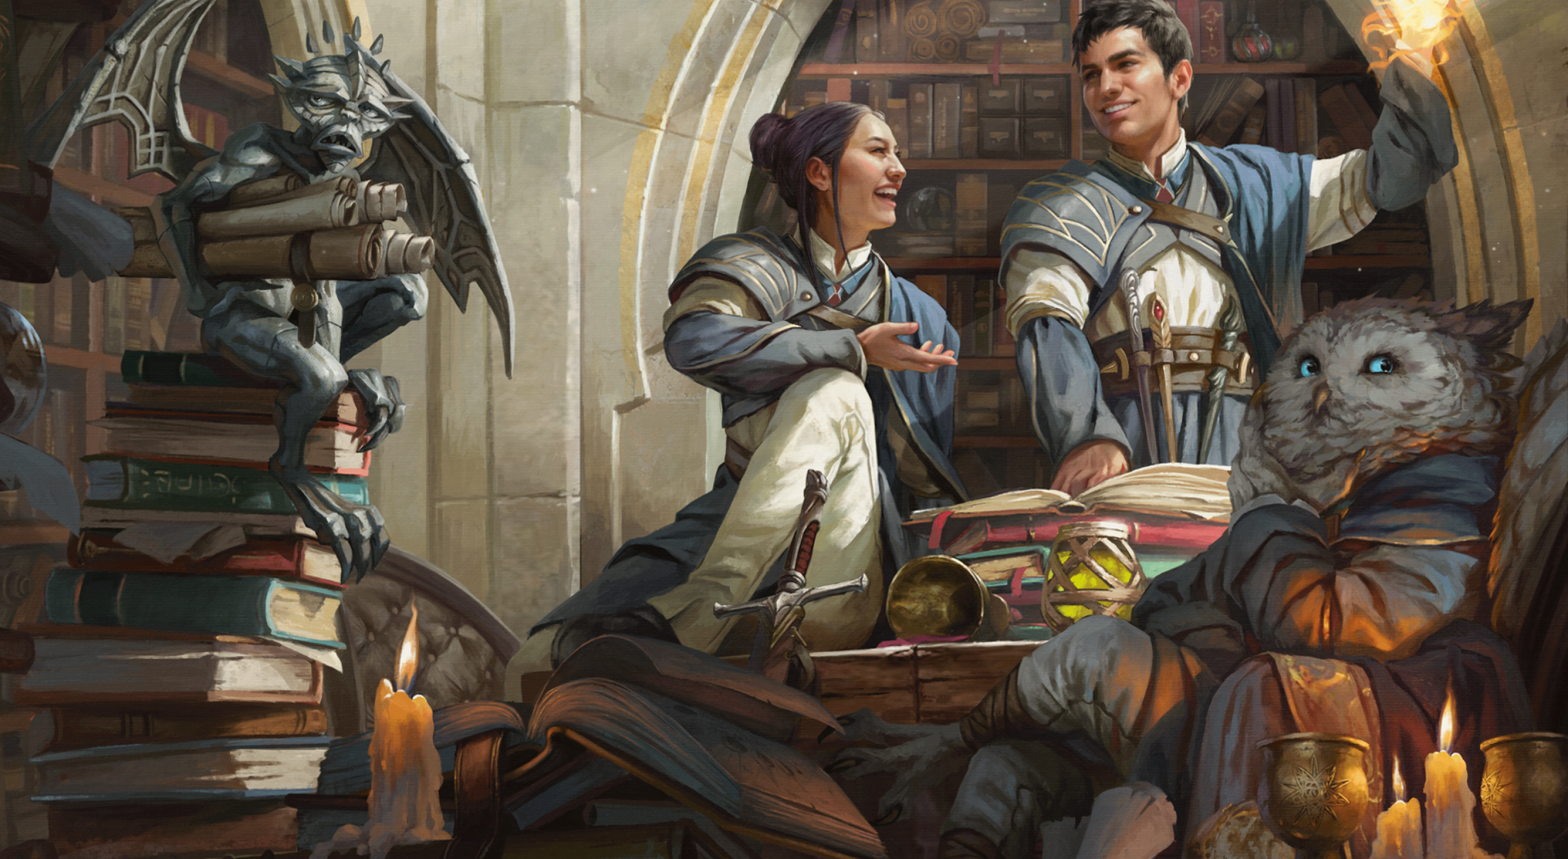 Class is in session later this year for D&D parties. (Image: Magali Villeneuve/Wizards of the Coast)